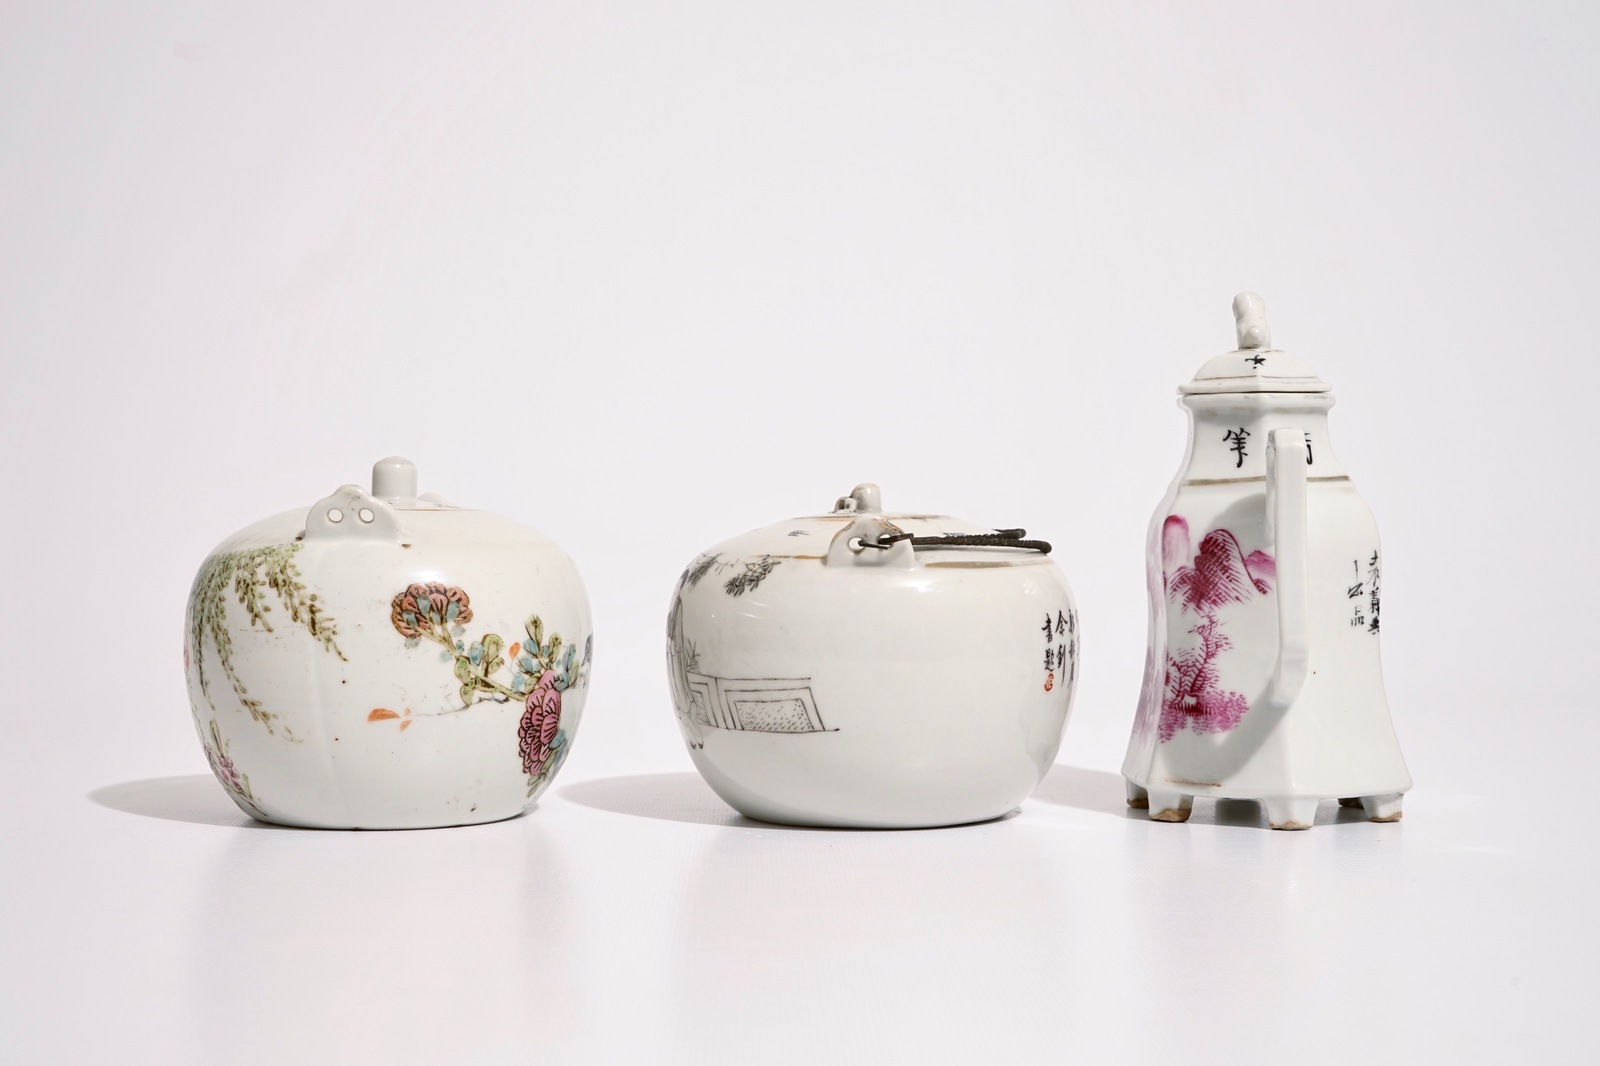 Two Chinese qianjiang cai teapots and a wine jug, 19/20th C. Dim.: H.: 17,5 cm - L.: 15 cm - W.: 9 - Image 4 of 7